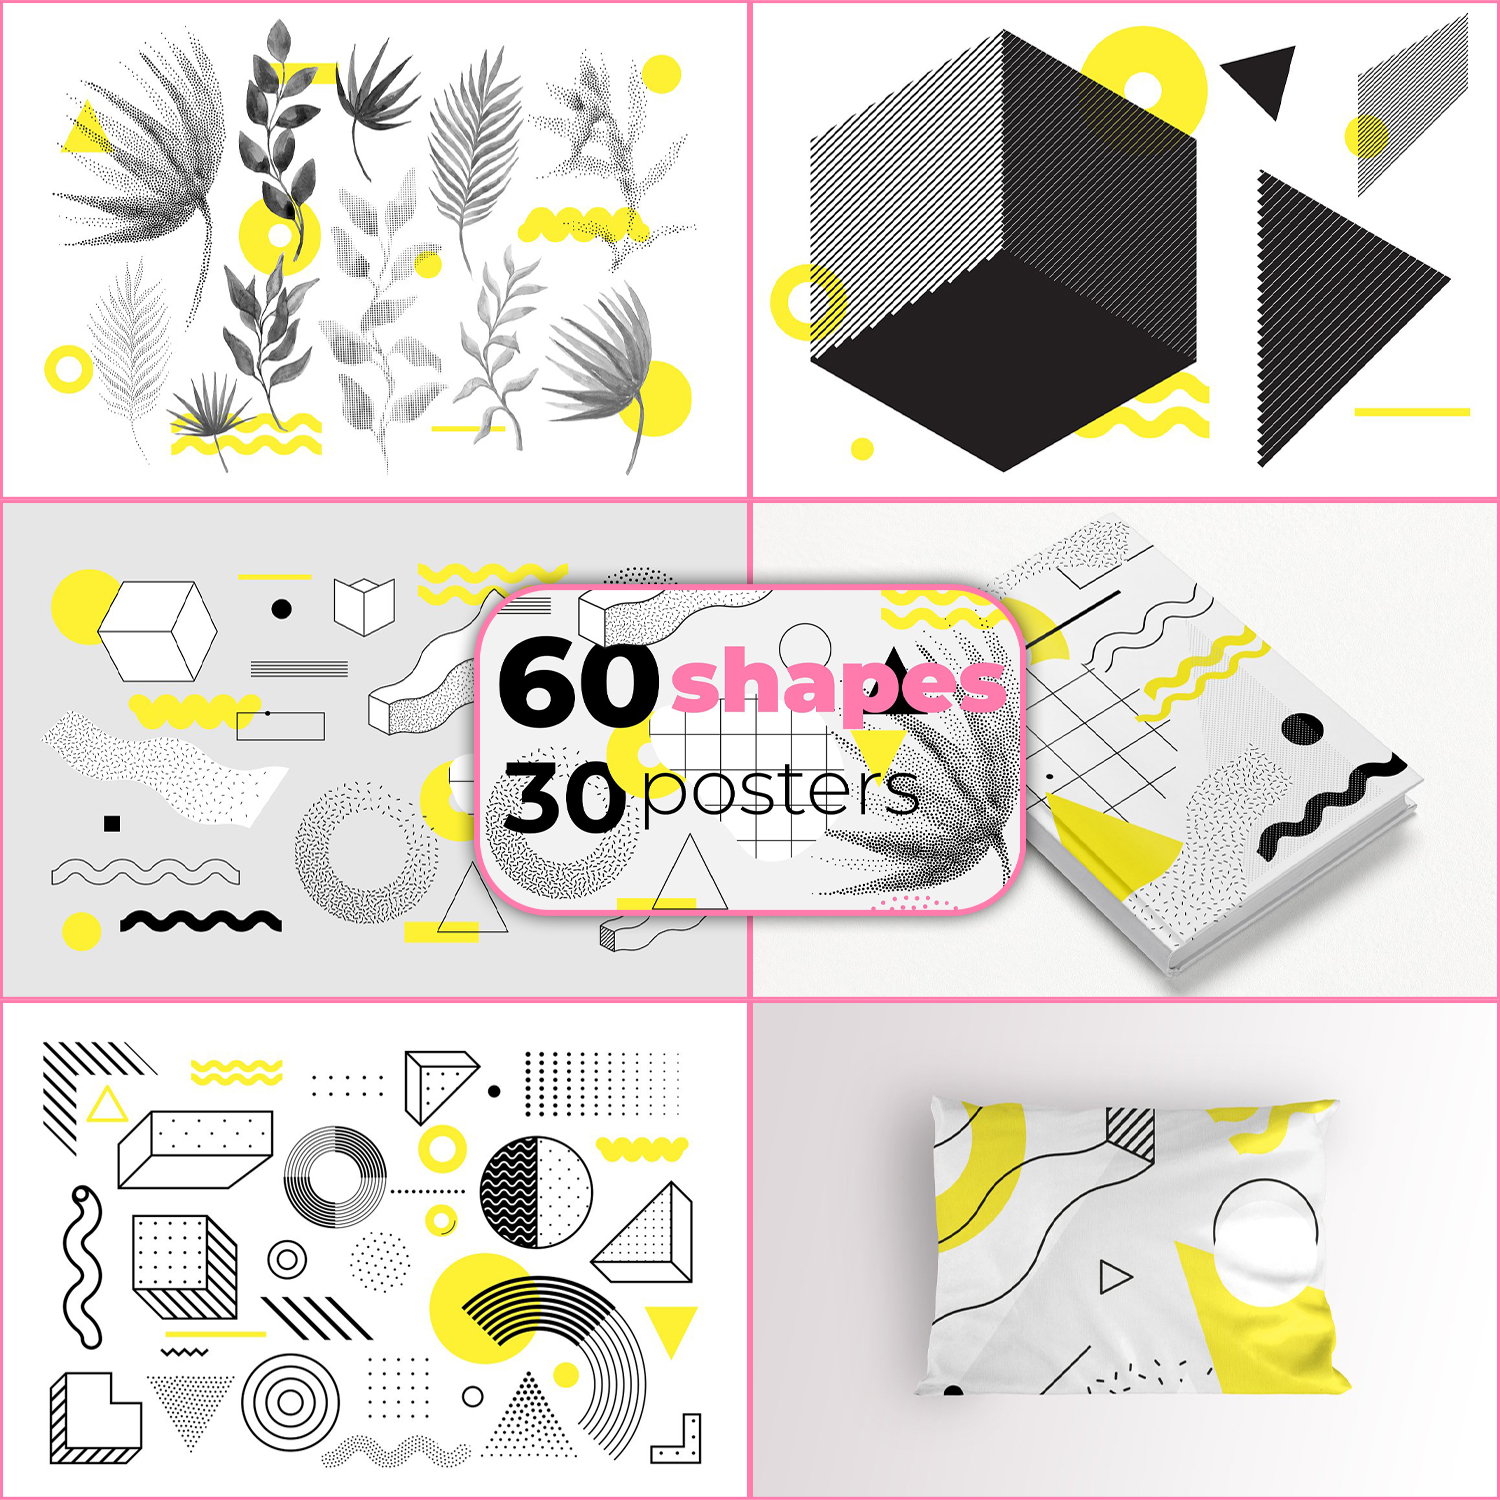 Preview images of geometric shapes for your stores.